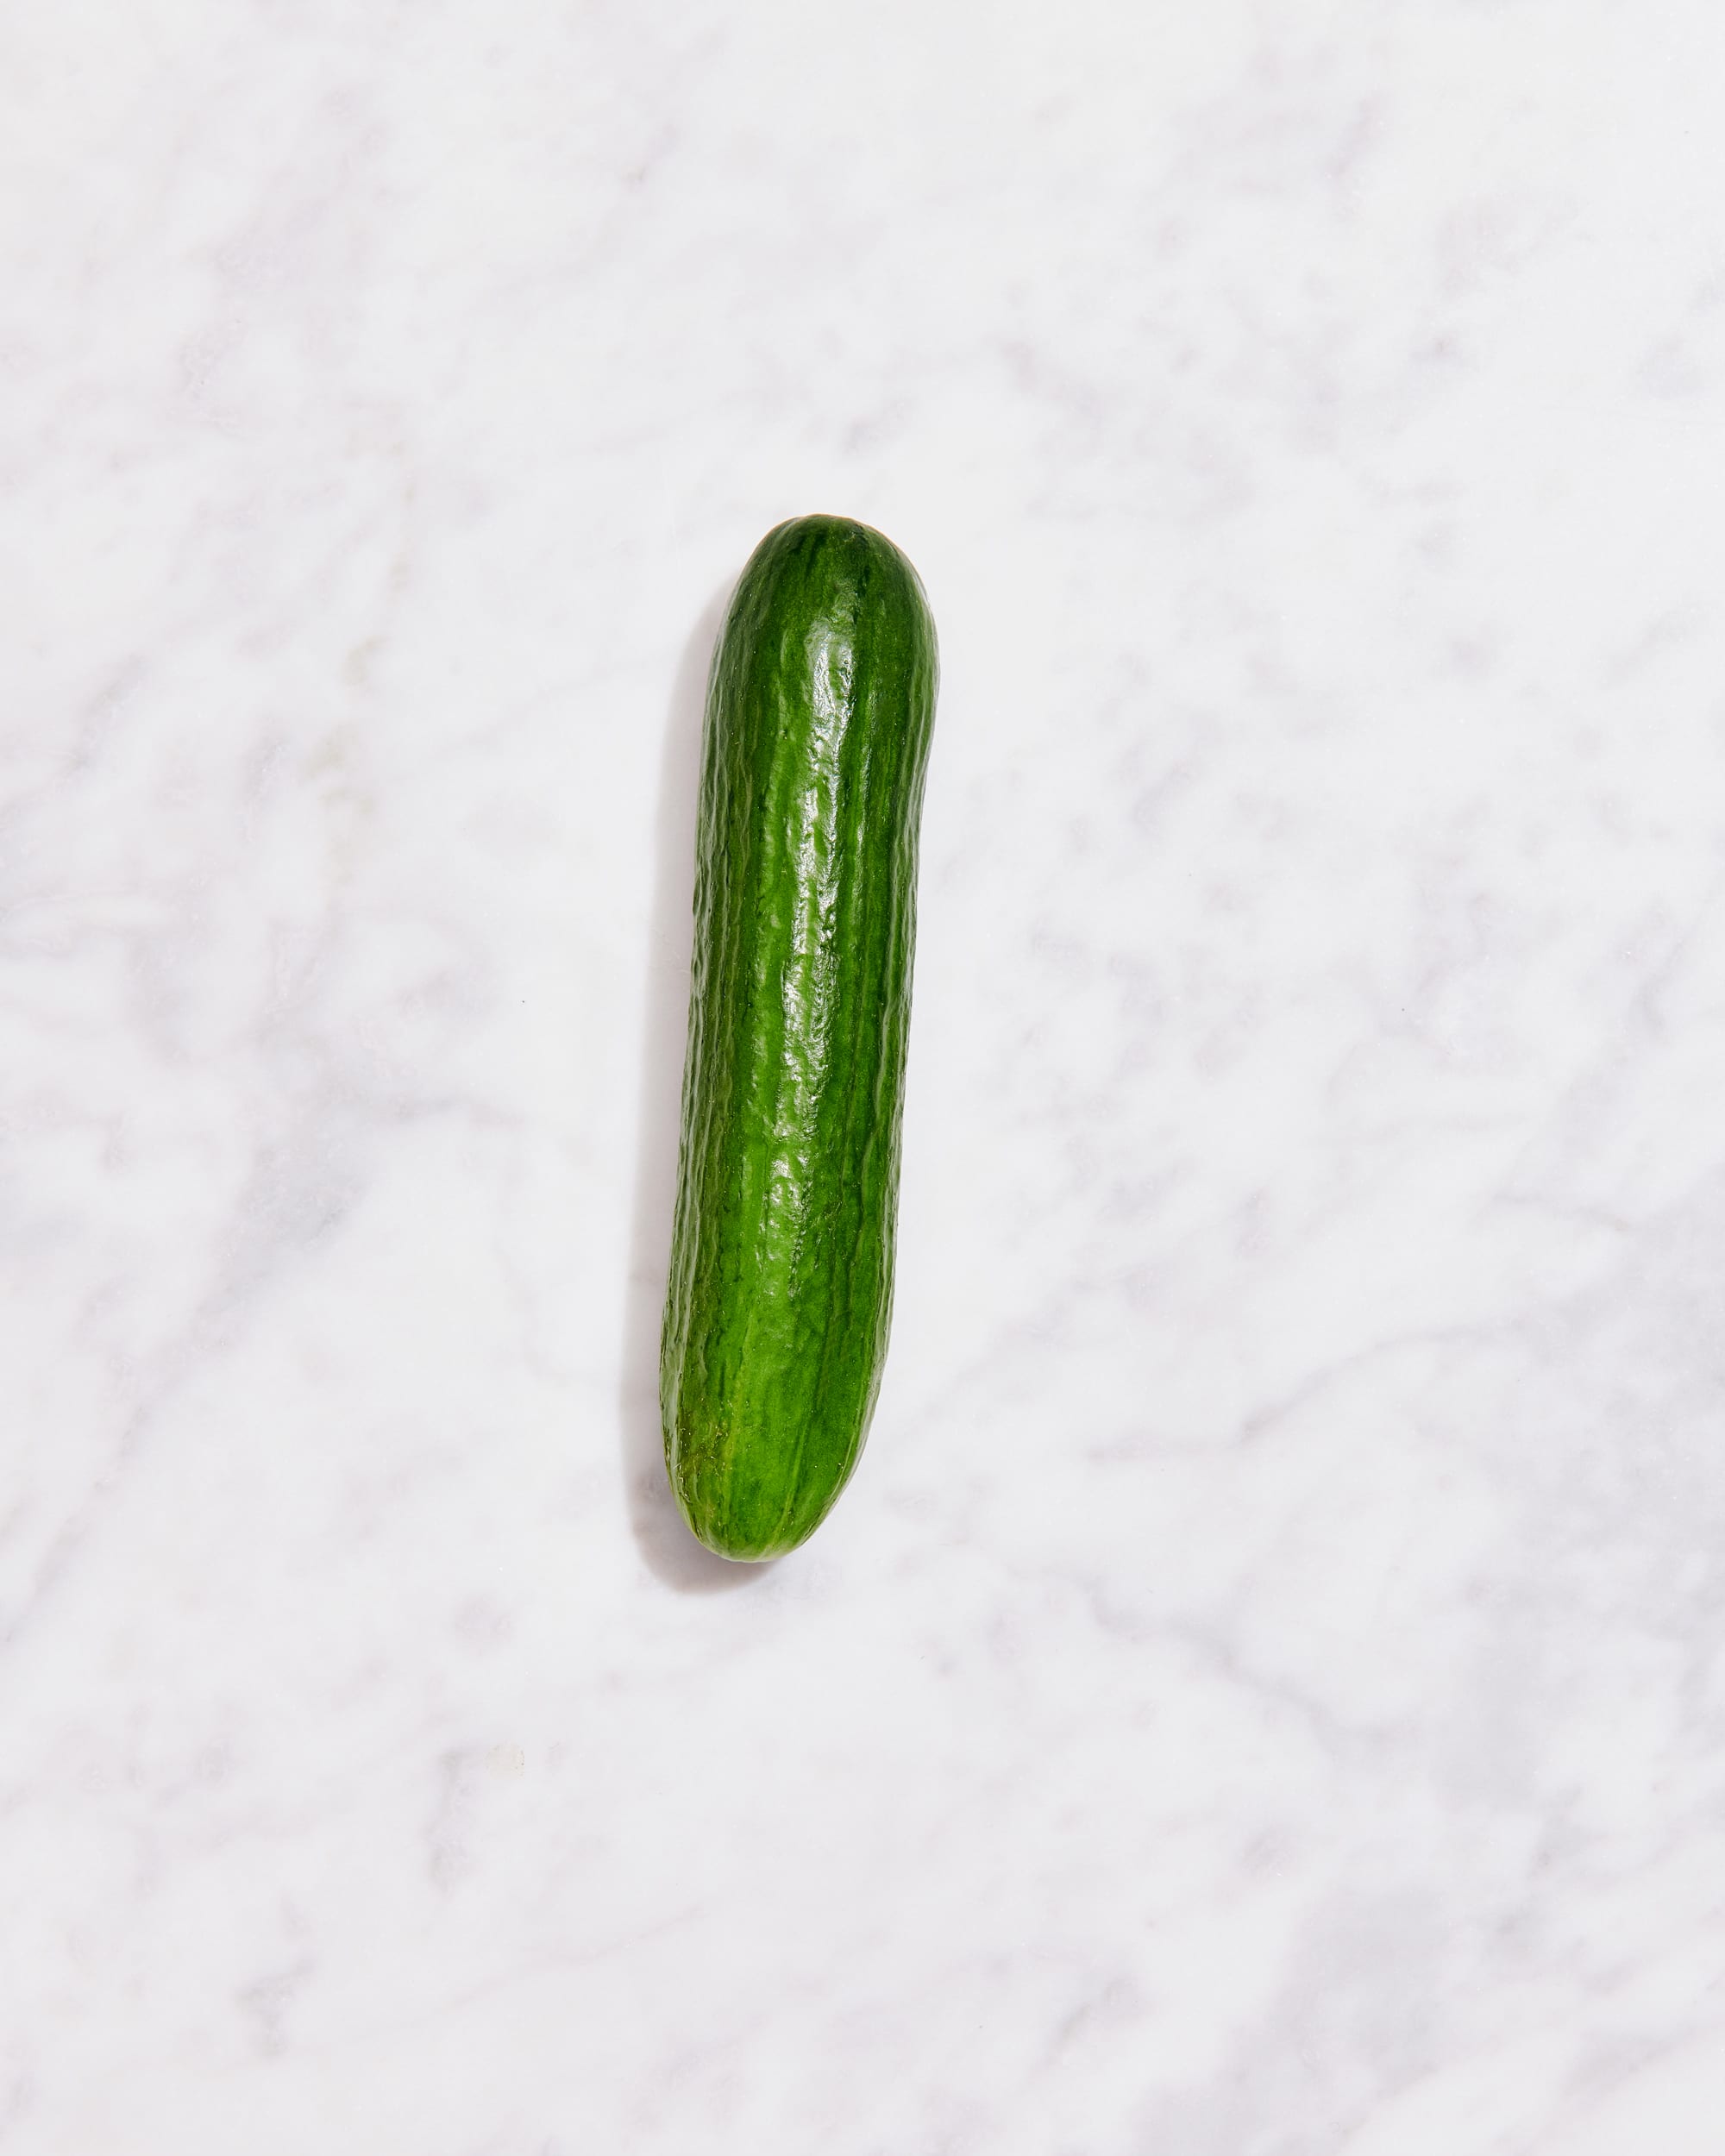 How to store cucumbers in easy ways - Fas Kitchen